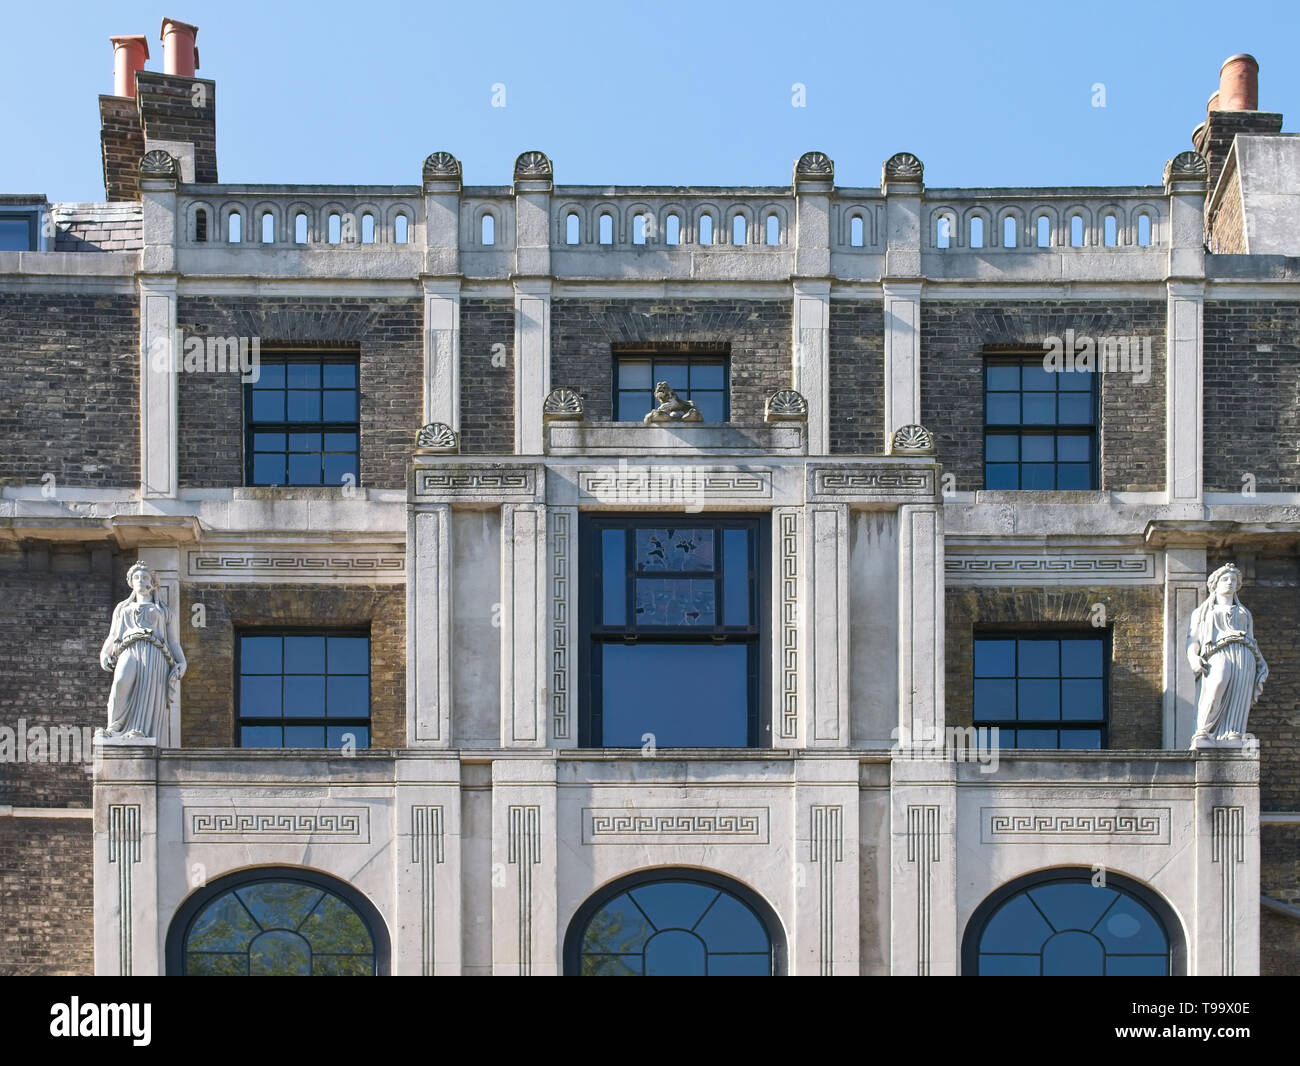 Close-up of the facade of Sir John Soan's Museum at Lincoln`s Inn Fields, Holborn, London, UK. Stock Photo